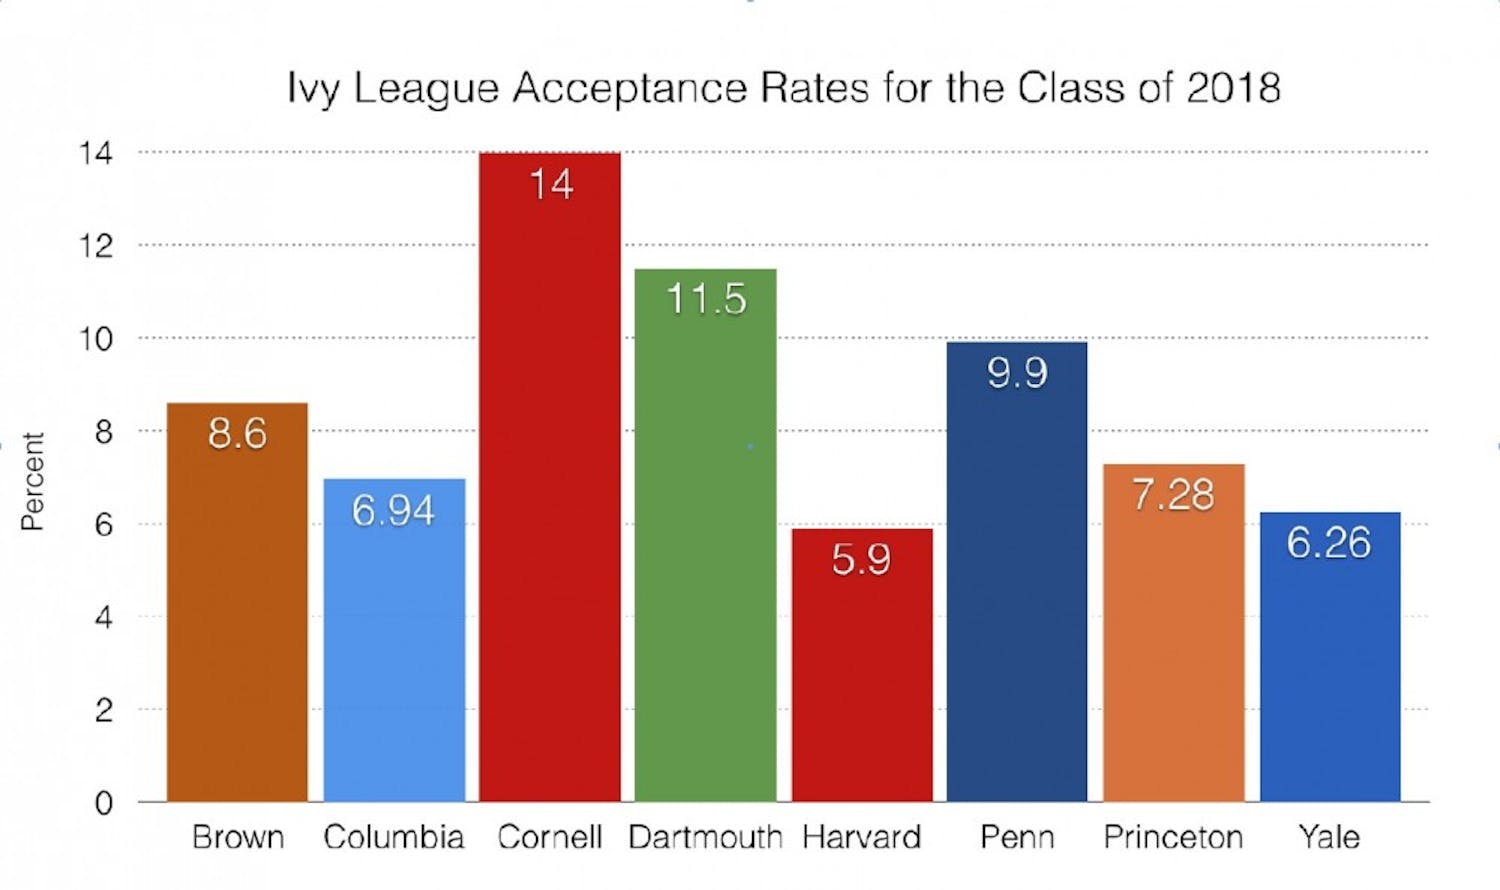 Dartmouth’s acceptance rate was the second-highest among Ivy League institutions this year, rising from 10 percent last year and 9.4 percent the year before.